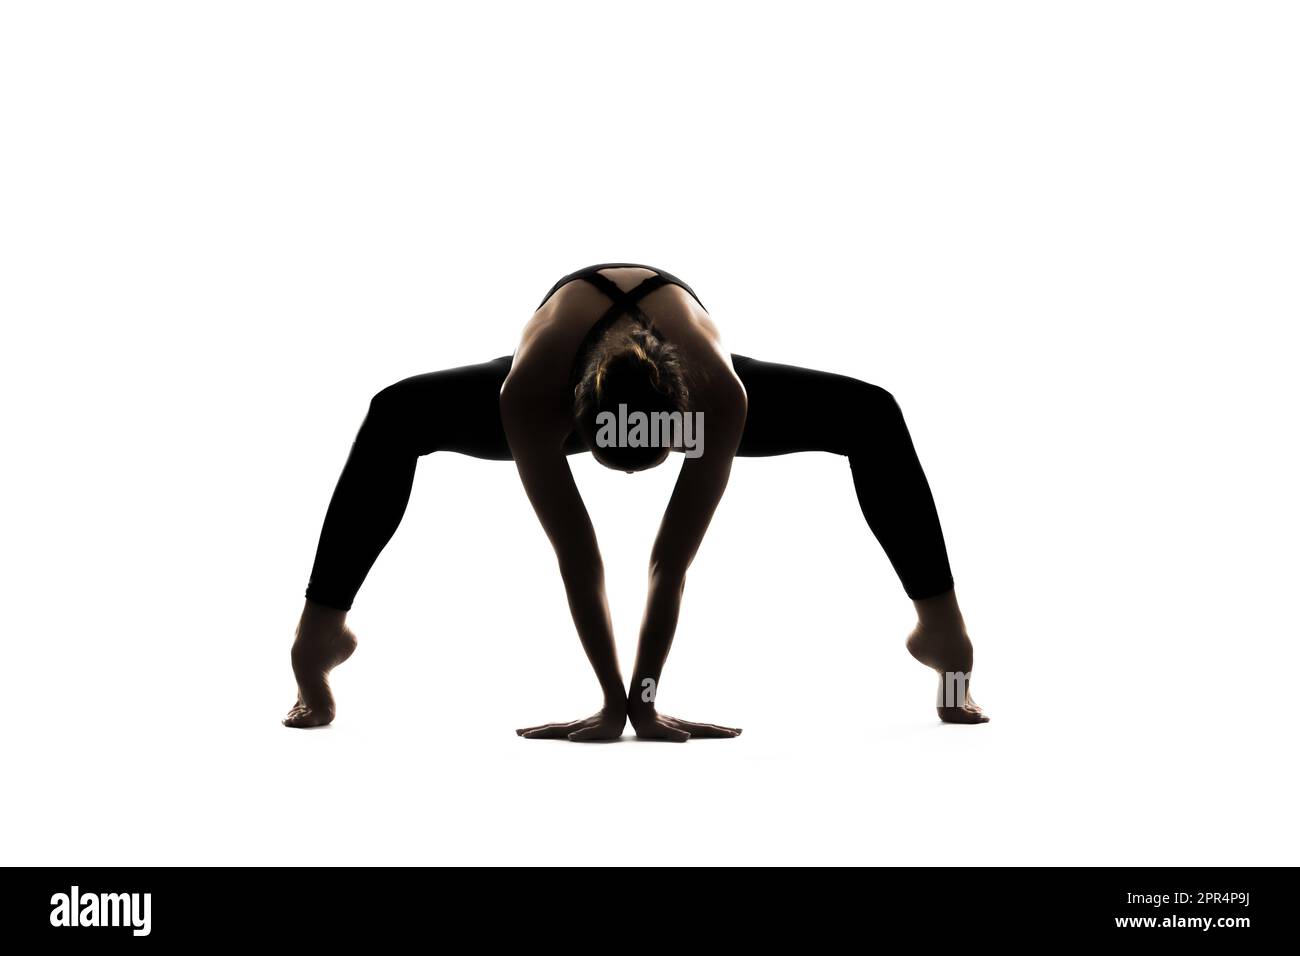 Woman in a yoga pose is doing a yoga asana pose on a white background Stock Photo